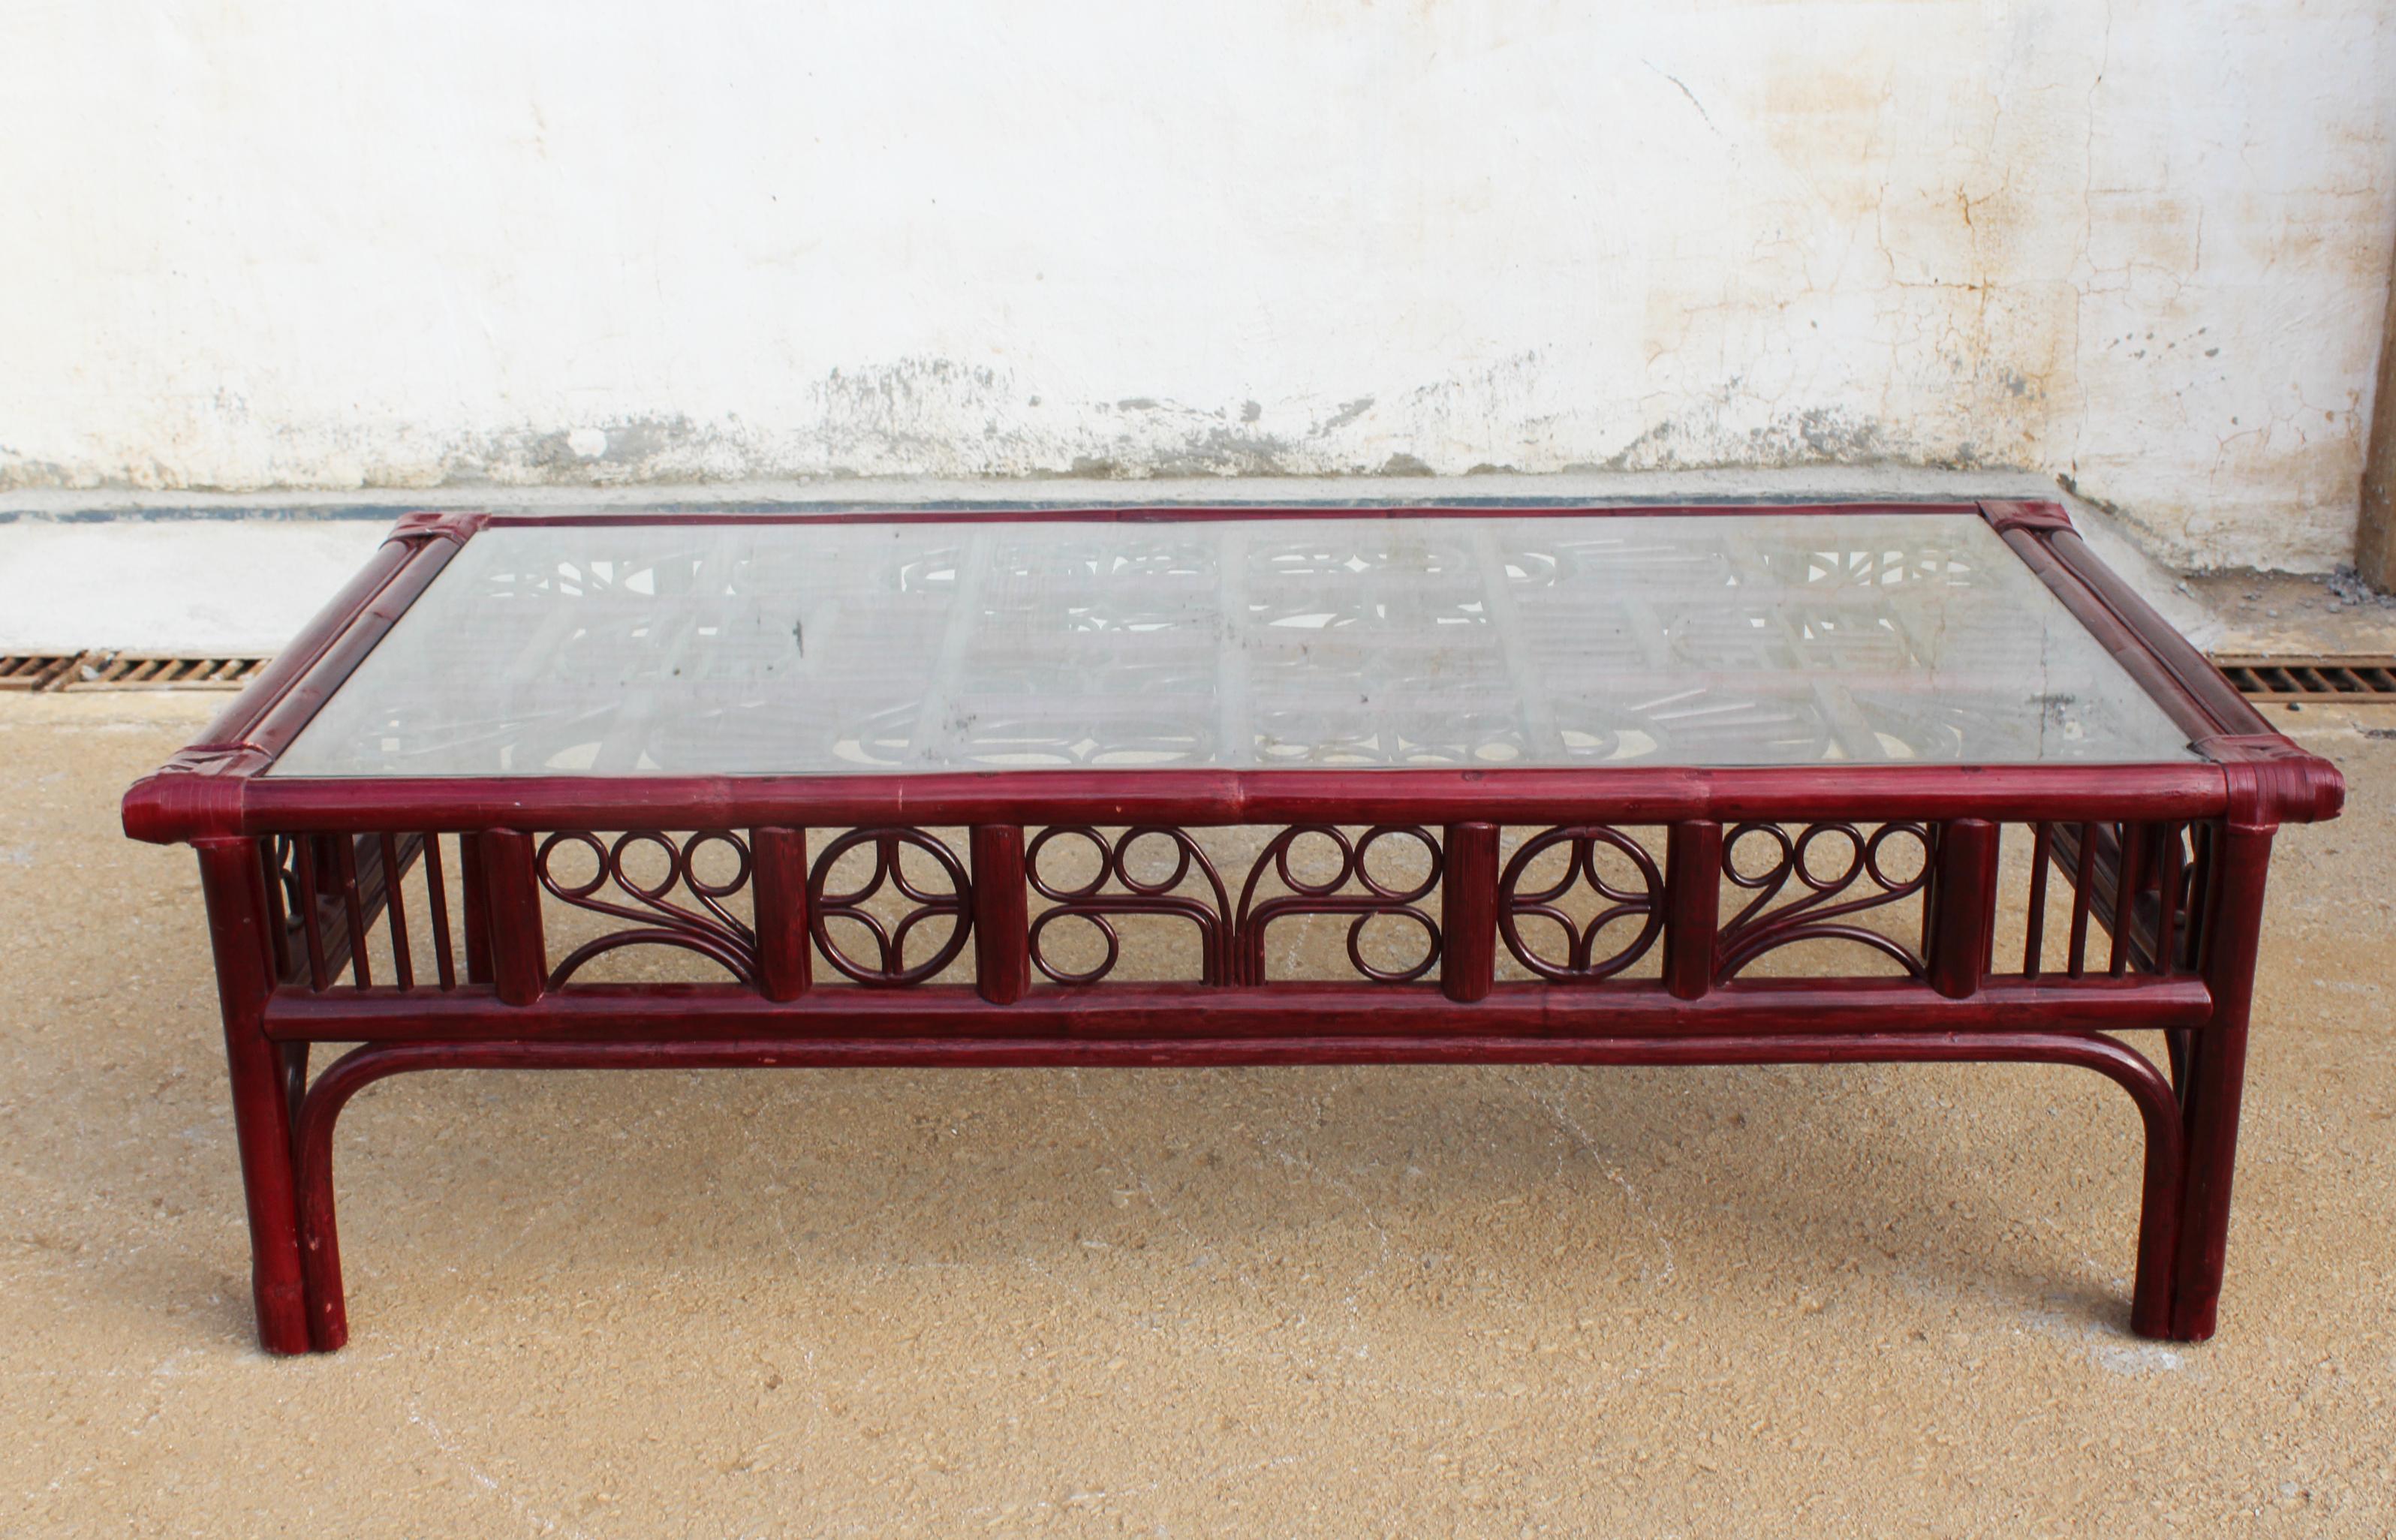 1970s Spanish red wood imitating cane bamboo rectangular coffee table set with leather binds, glass top, and decorated with geometric Orientalist motifs.
  